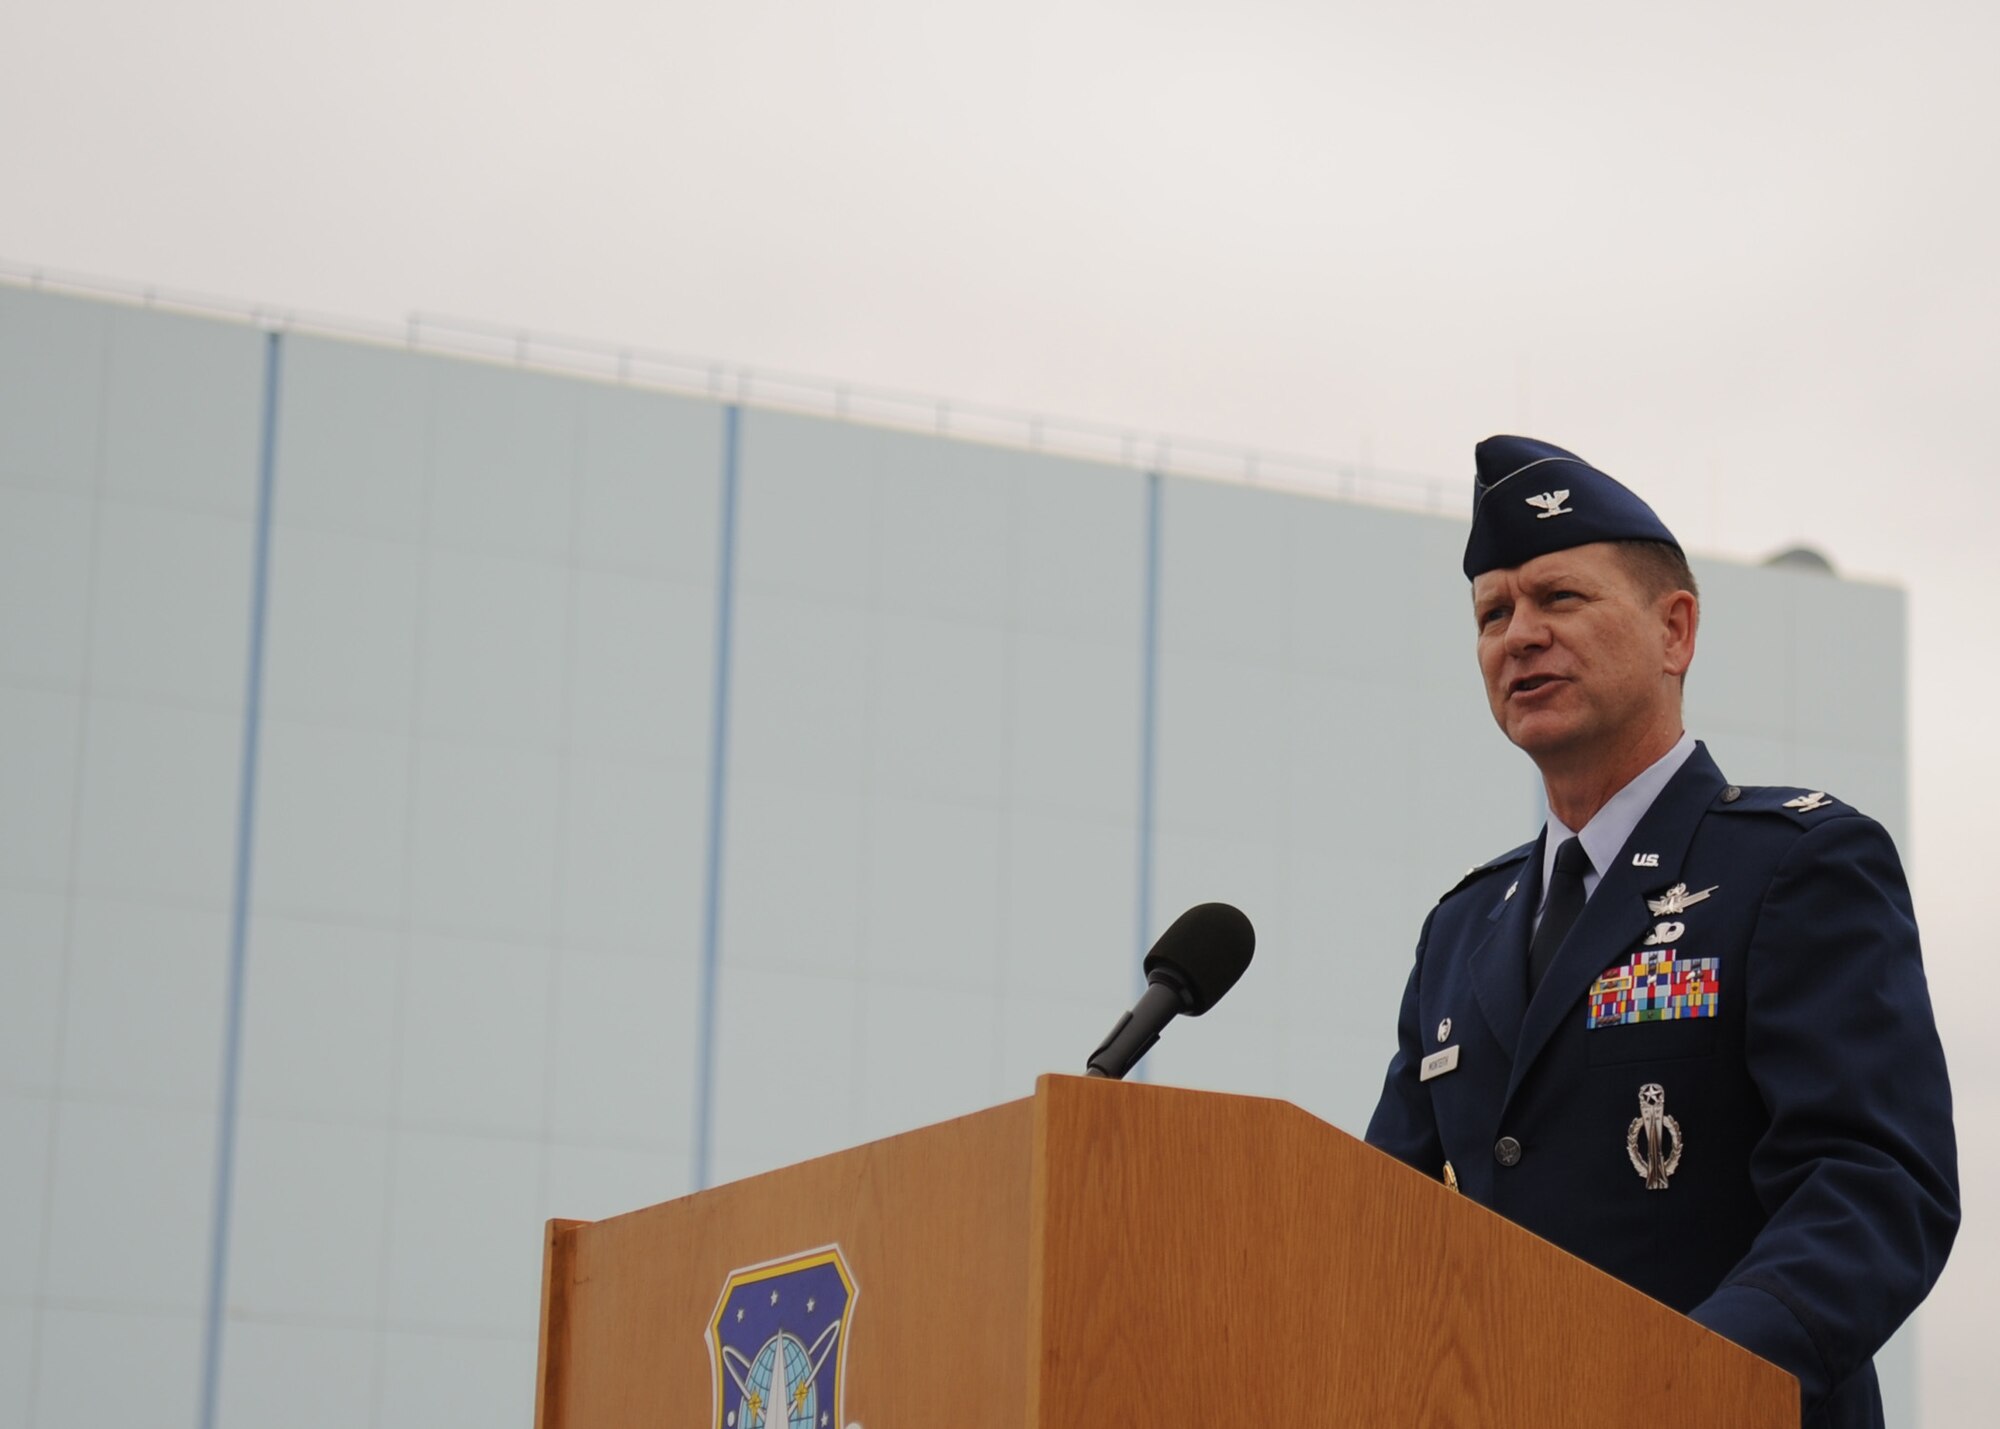 SUNNYVALE, Calif.-- Col. Wayne Monteith, the 50th Space Wing commander, delivers a speech during the closure ceremony of Onizuka Air Force Station here, Wednesday, July 28, 2010. Built in 1960, Onizuka AFS was originally known as the Air Force Satellite Test Center. It was selected for closure by the Base Closure and Realignment Commission in 2005, with the recommendation to move operations to Vandenberg Air Force Base, in order to consolidate satellite command and control operations while reducing excess infrastructure. (U.S. Air Force Photo/Senior Airman Bryan Boyette)